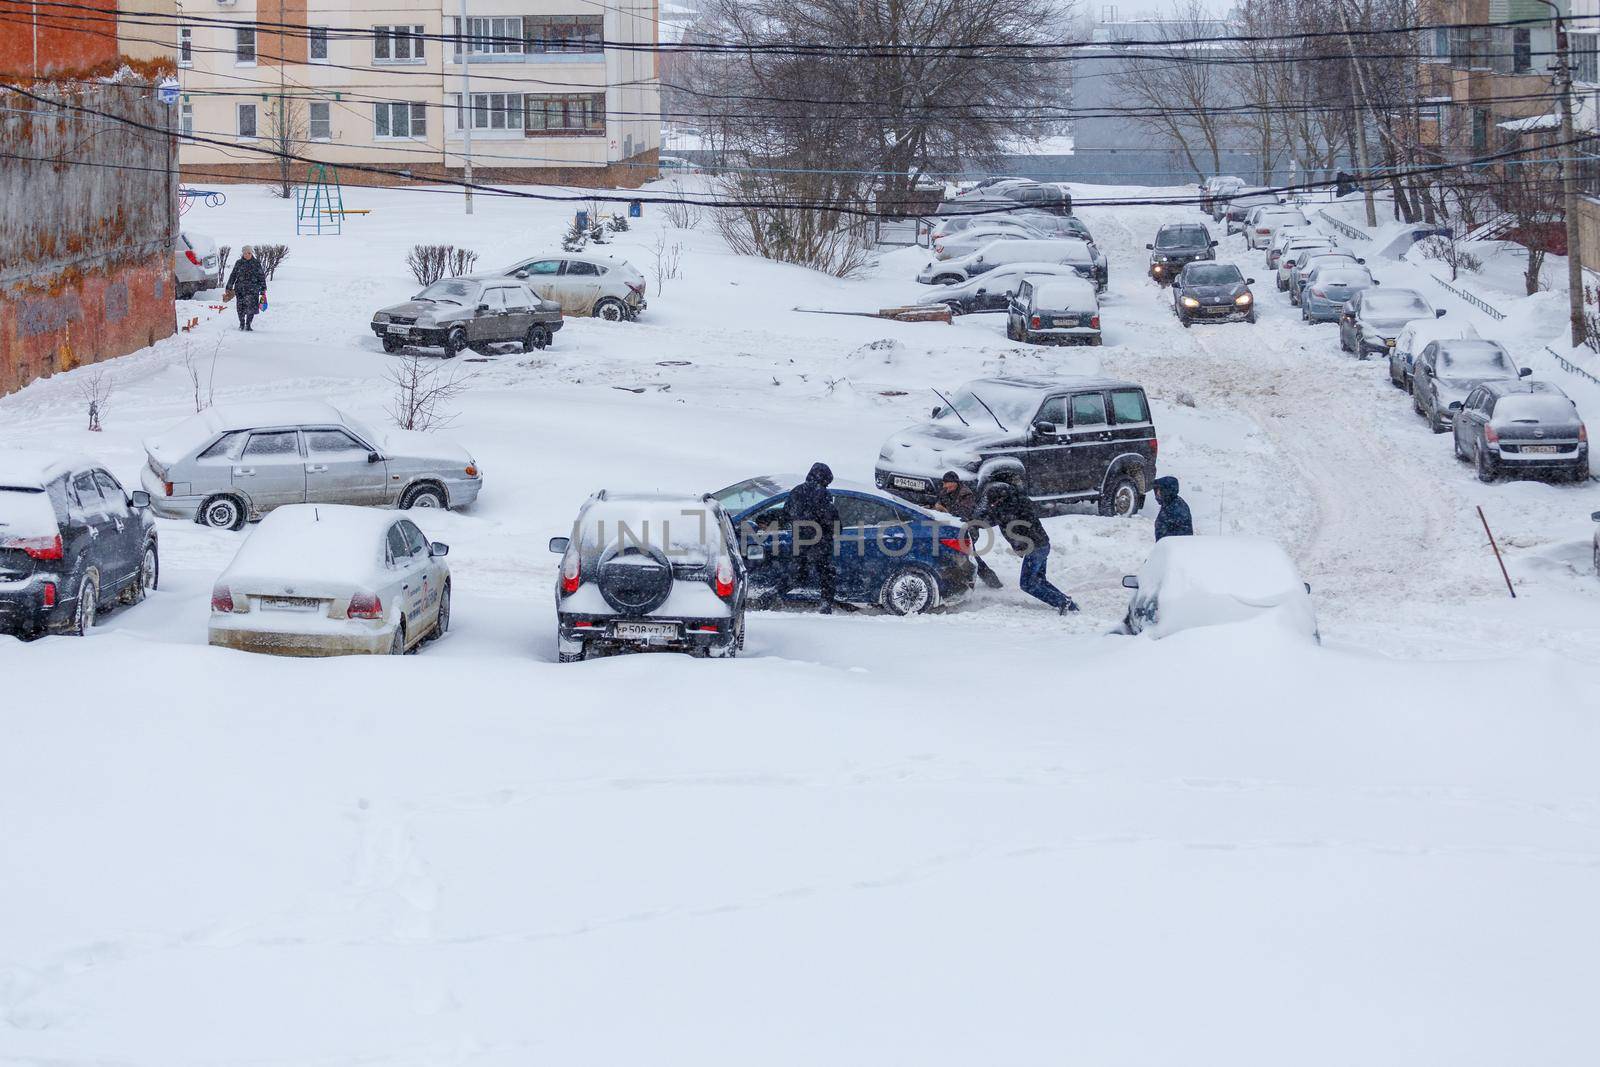 Tula, Russia - February 13, 2021: Two men pushing stuck Hyundai Solaris car through a snowy yard between rows of parked cars in deep snow in slope.